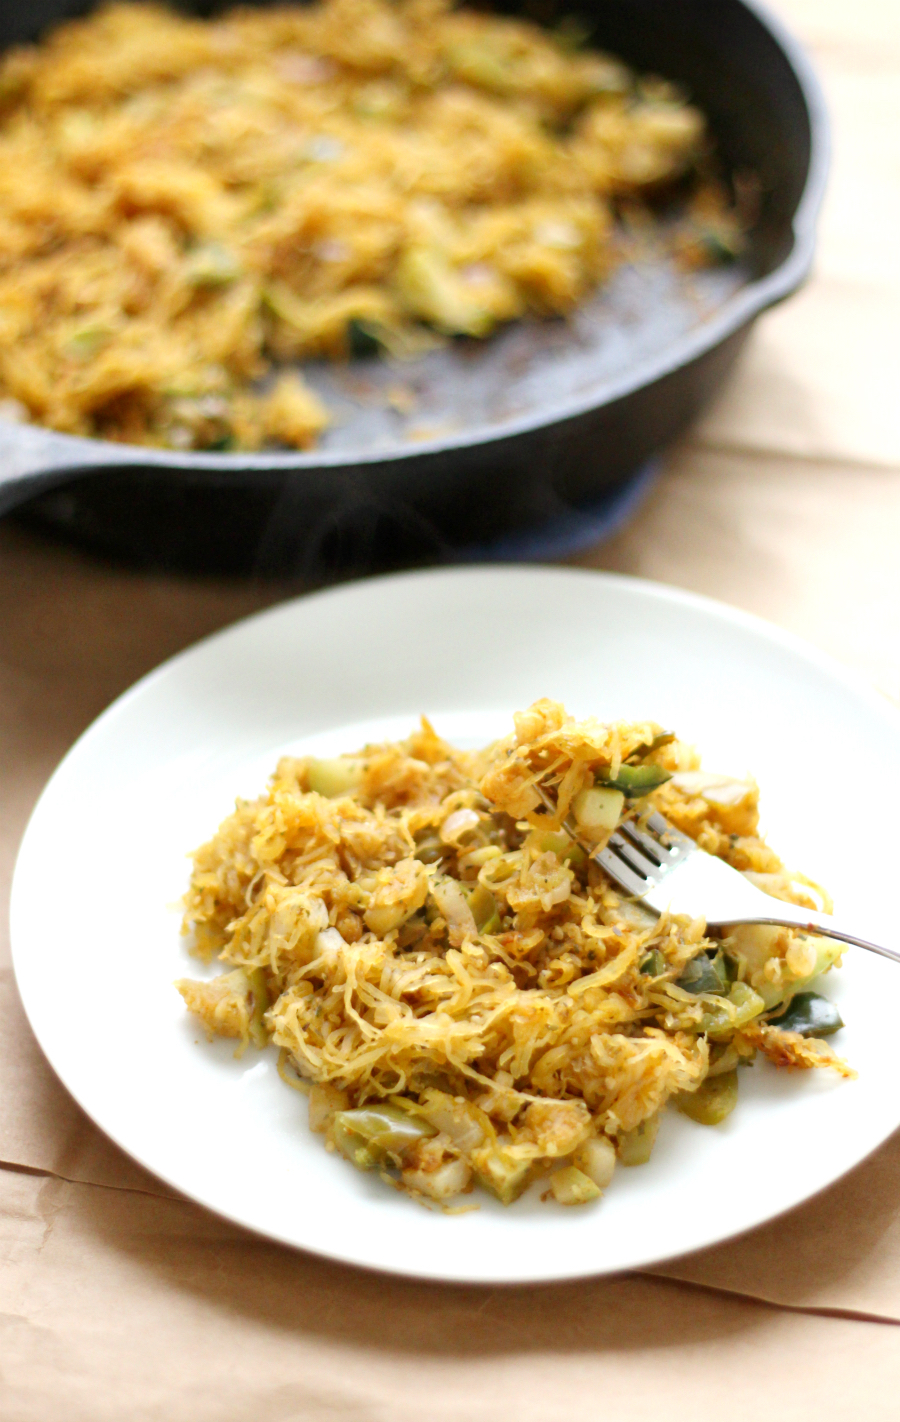 Mexican Spaghetti Squash Hash Browns (Gluten-Free, Vegan, Paleo) | Strength and Sunshine @RebeccaGF666 A lighter take on the savory breakfast hash! This Mexican Spaghetti Squash Hash Browns recipe is gluten-free, vegan, paleo, allergy-friendly, and easy to whip up! A healthy and veggie-packed meal to start your day off right and with a little spice!